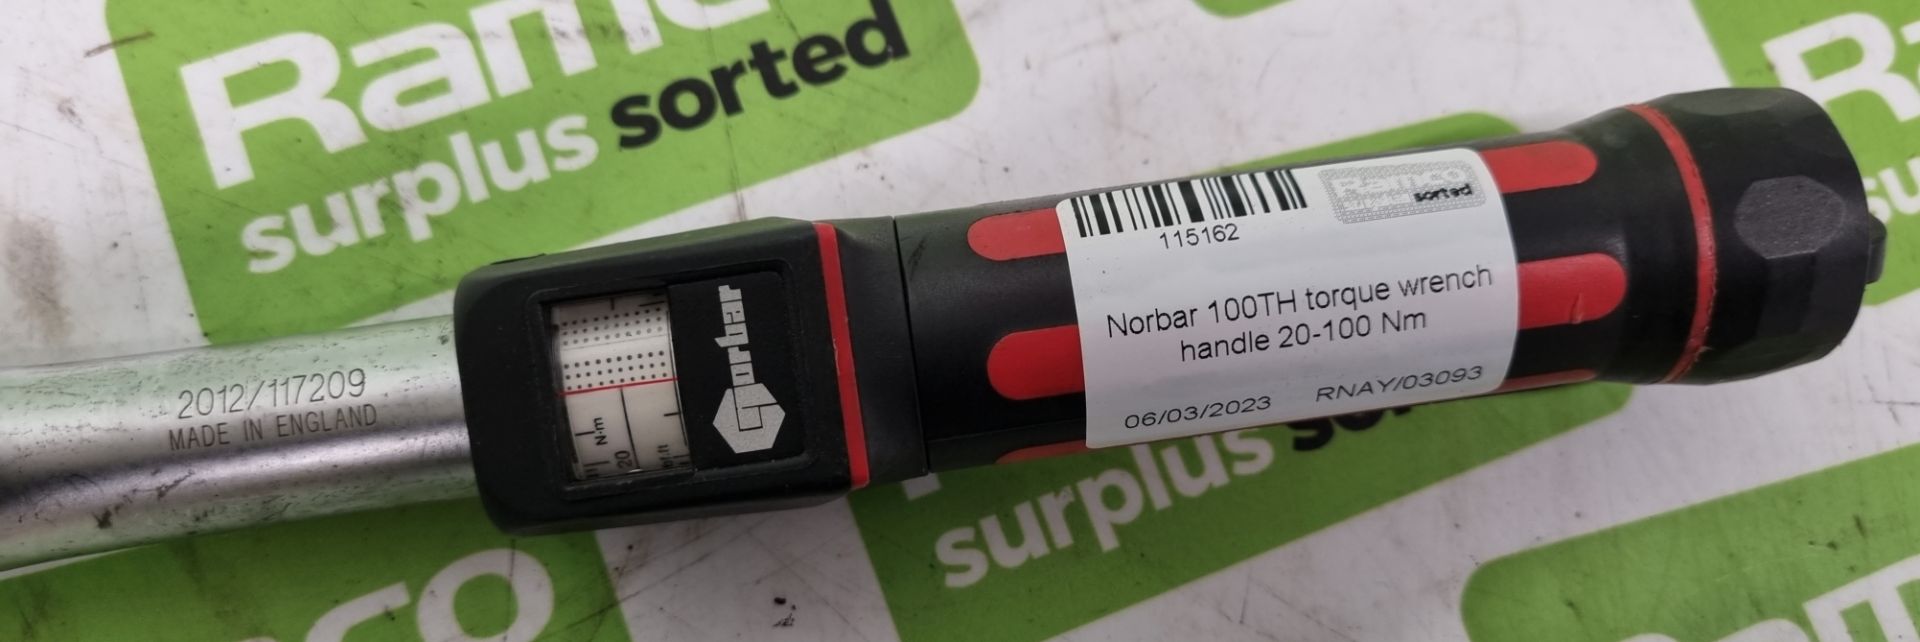 Norbar 100TH torque wrench handle 20-100 Nm - Image 3 of 3